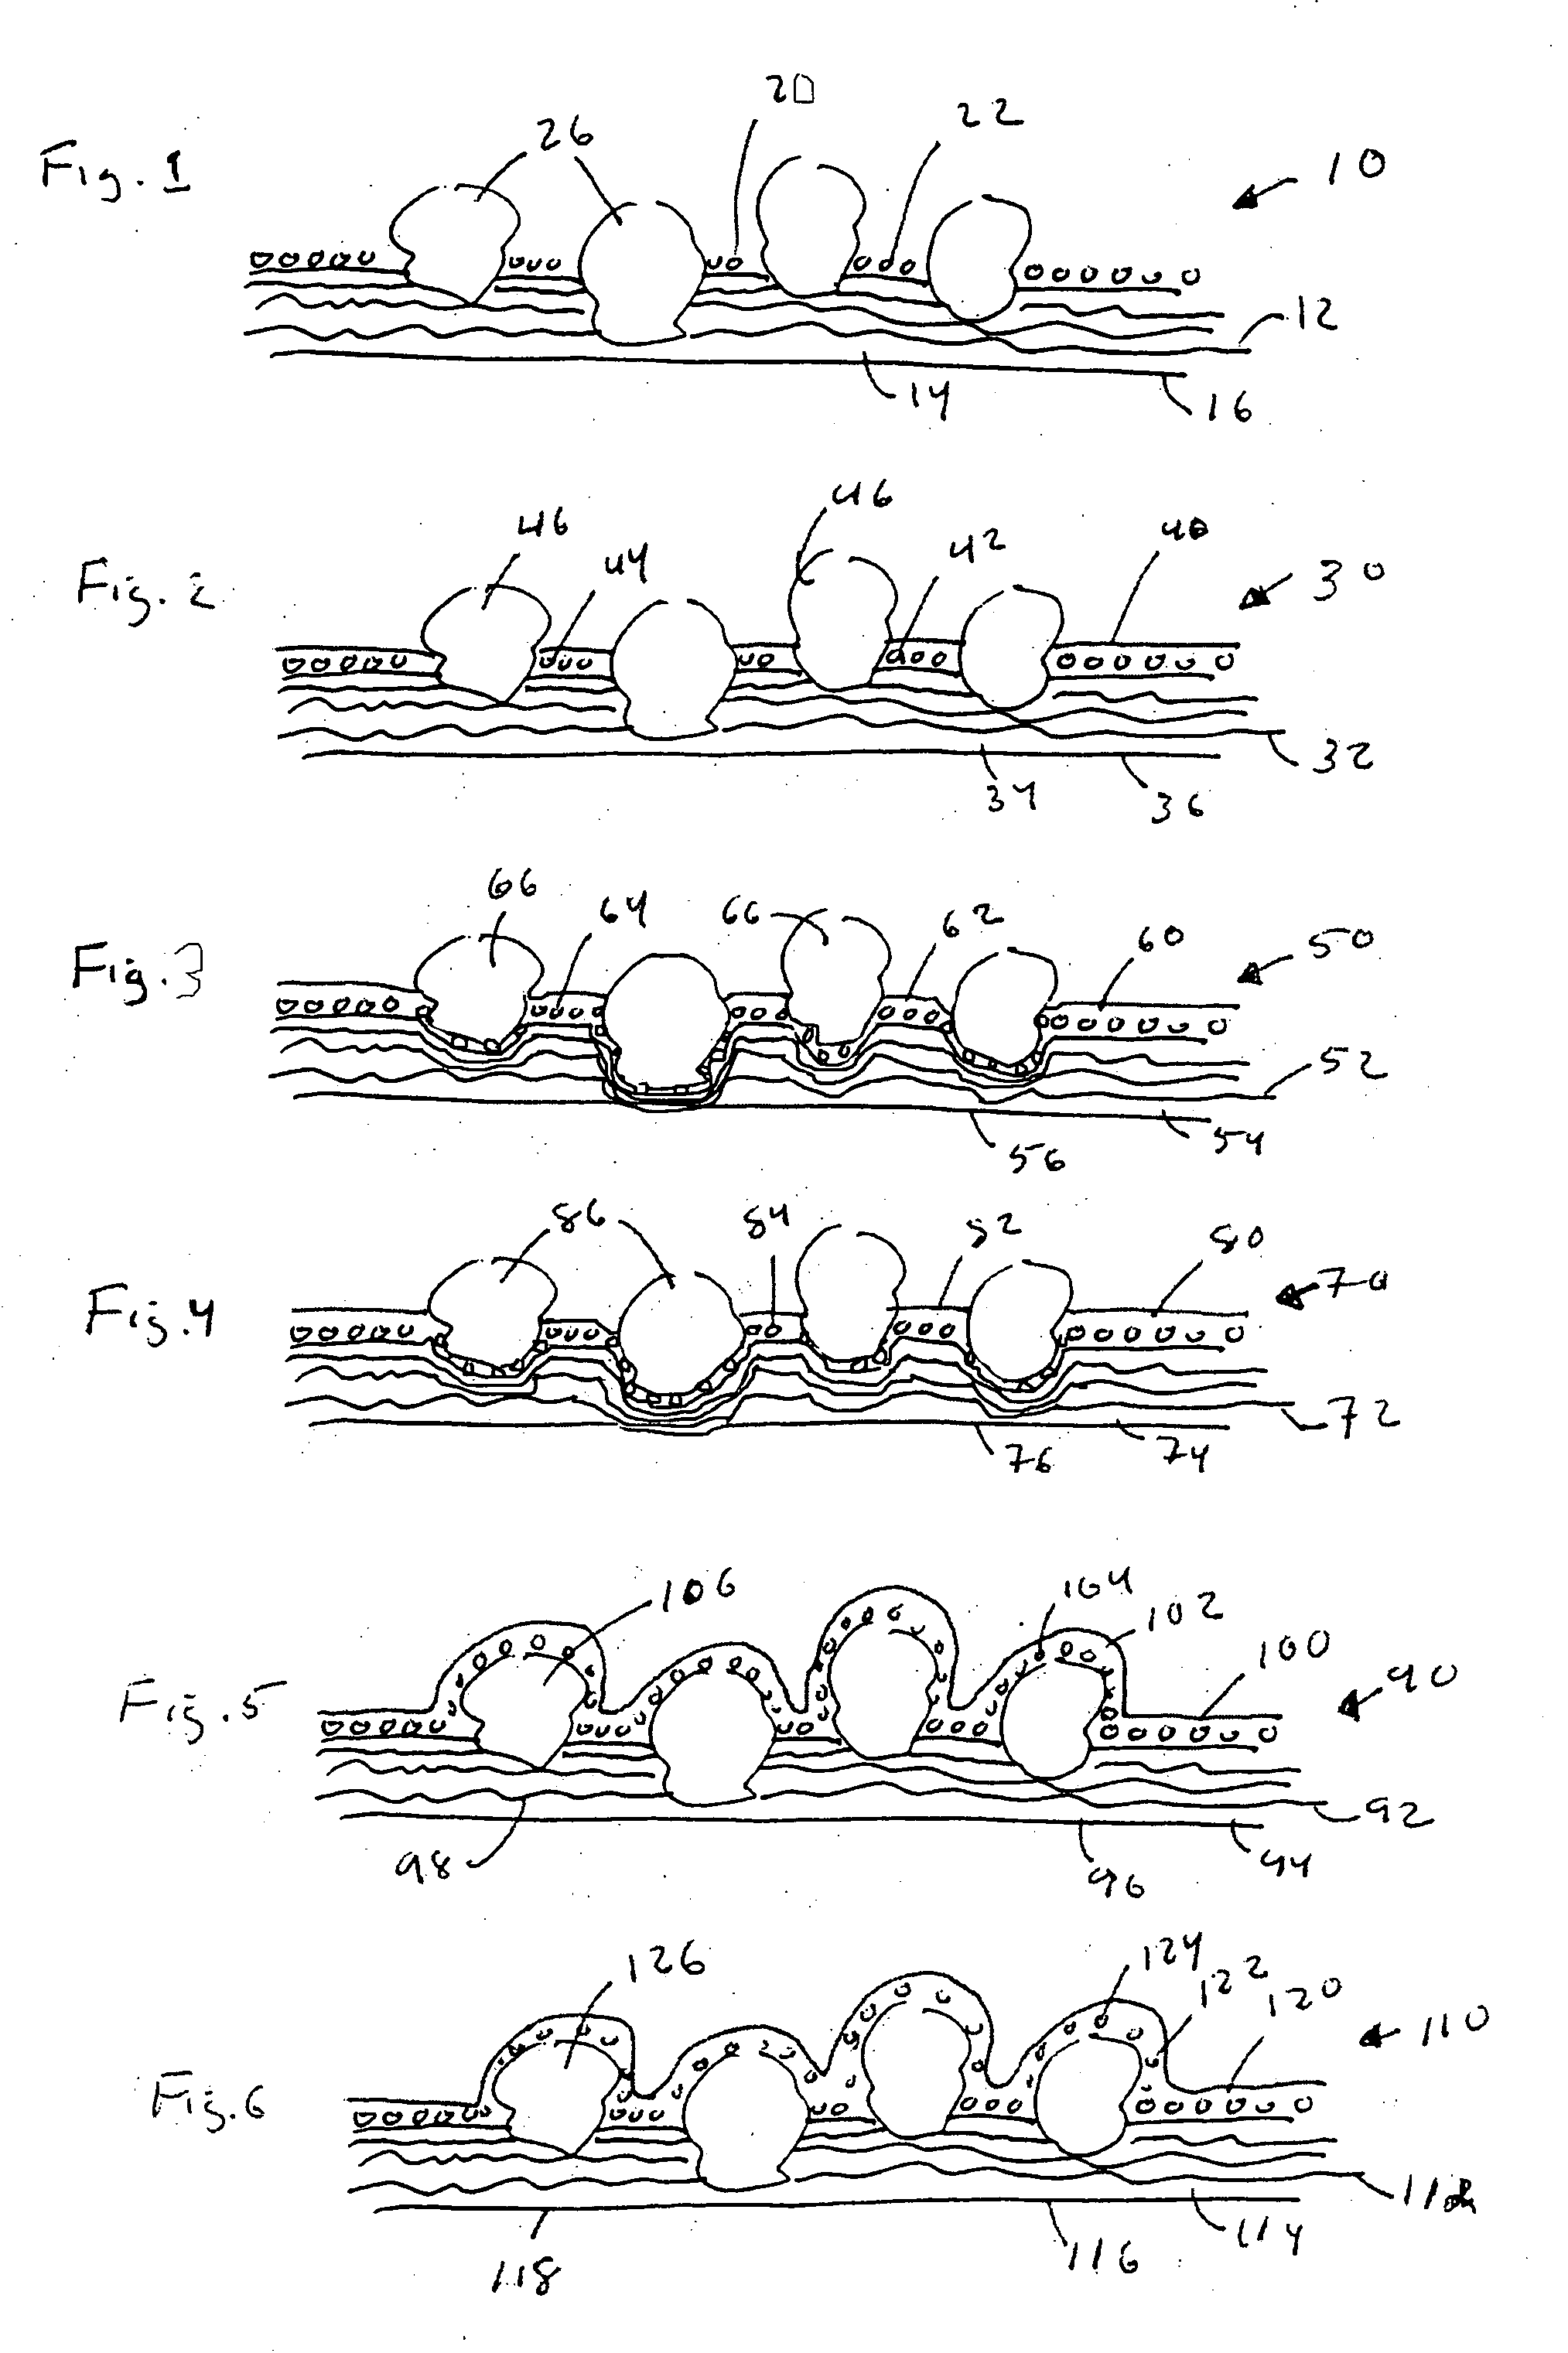 Mineral-surfaced roofing shingles with increased solar heat reflectance, and process for producing same